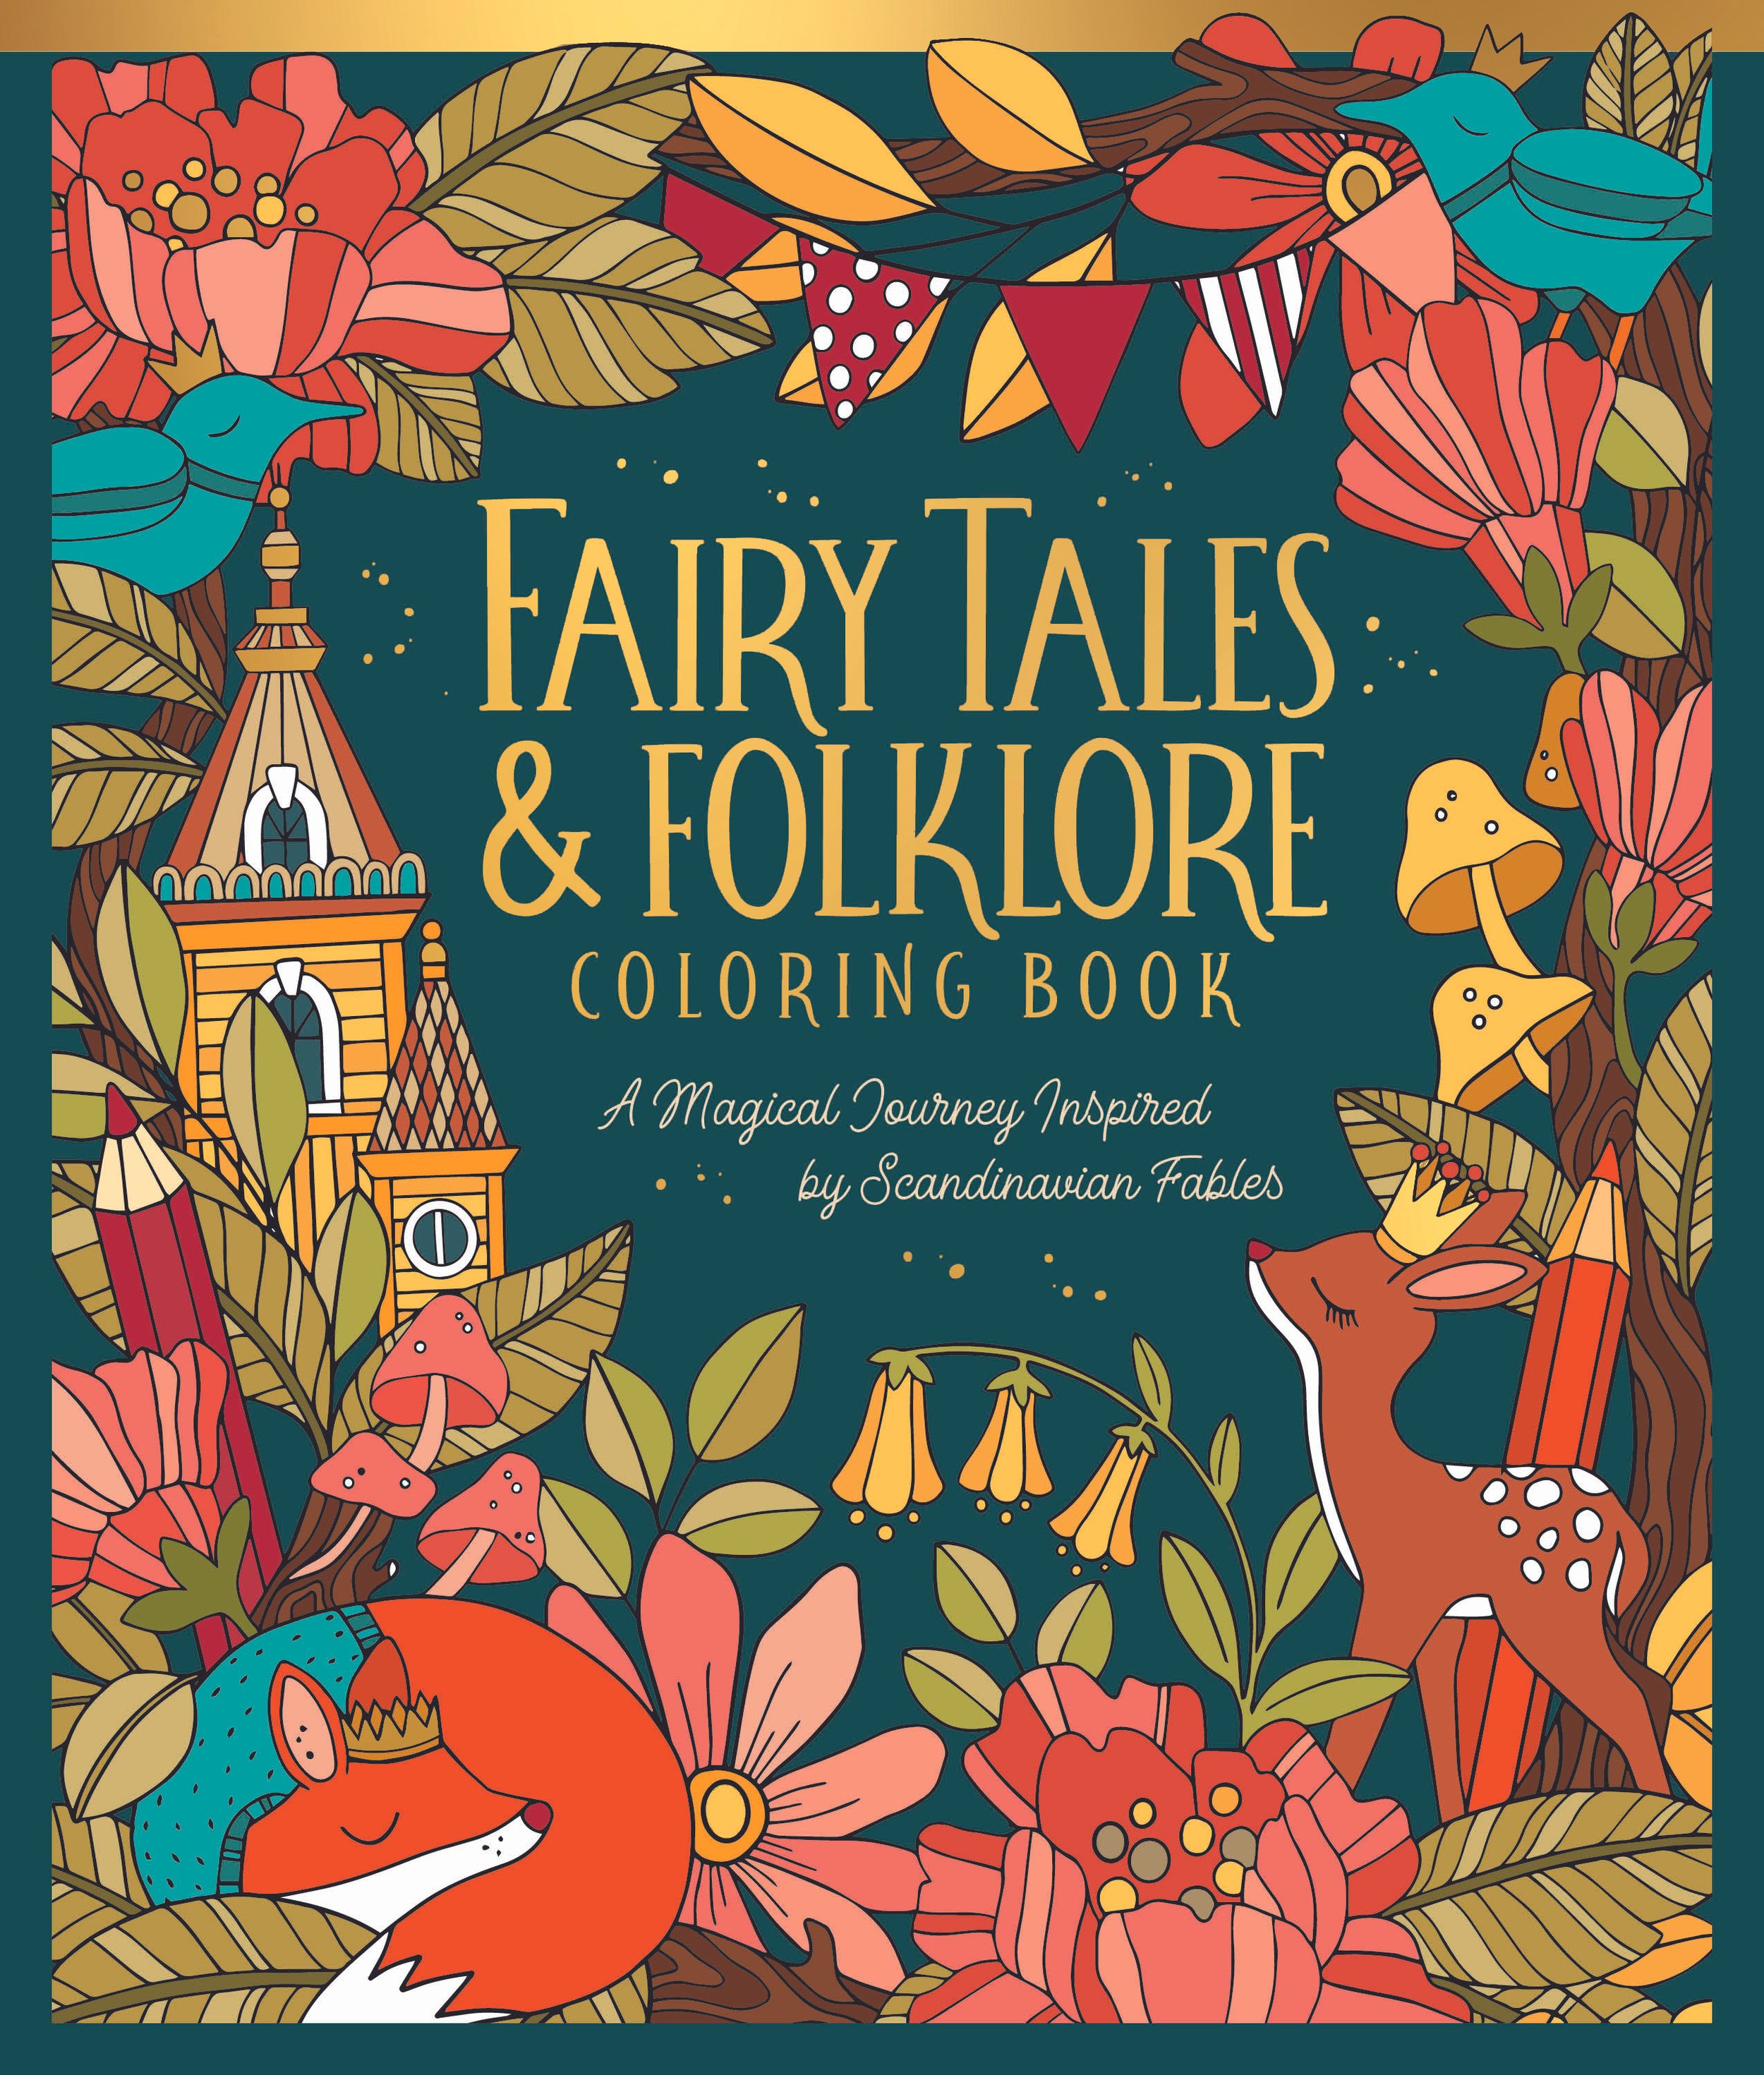 Fairy Tales & Folklore Coloring Book_Cover 978-0-7643-6857-8.jpg